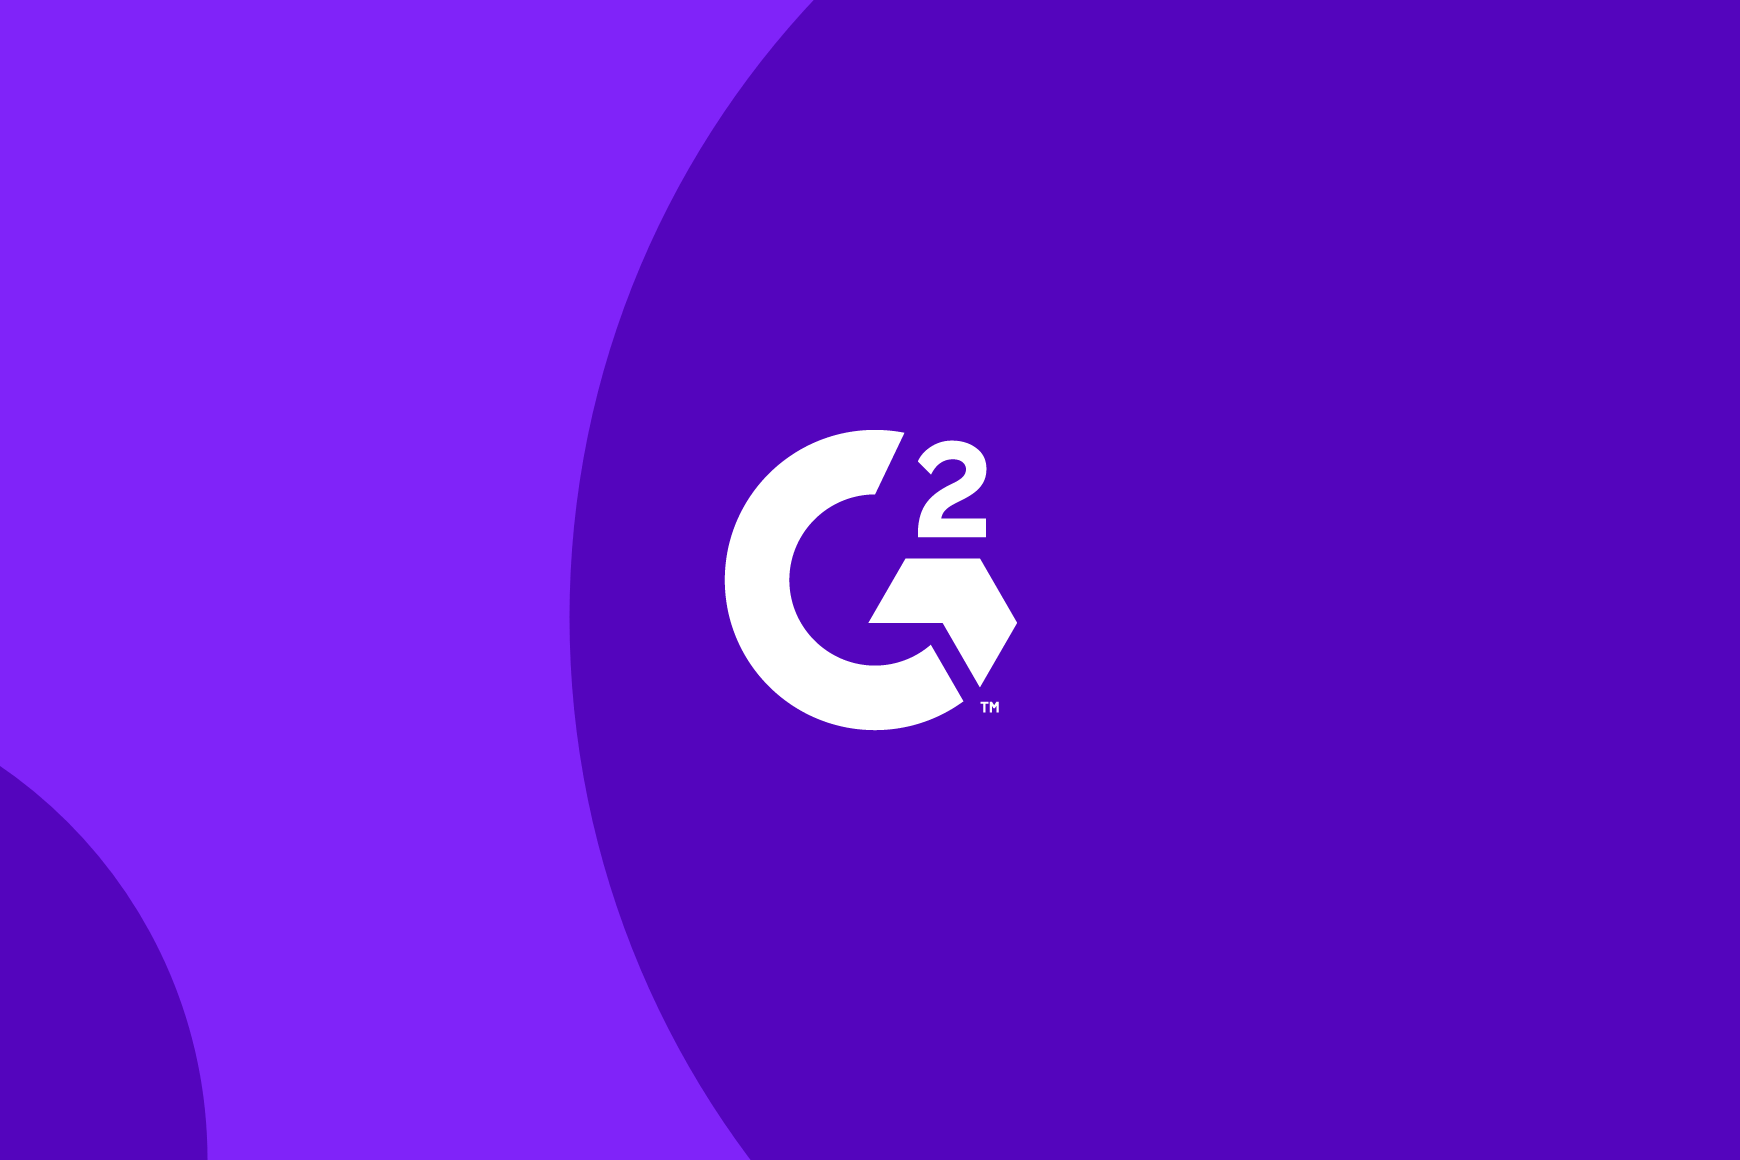 Talkdesk again leads G2 Spring 2021 with highest G2 Scores, more reports than any other CCaaS provider.